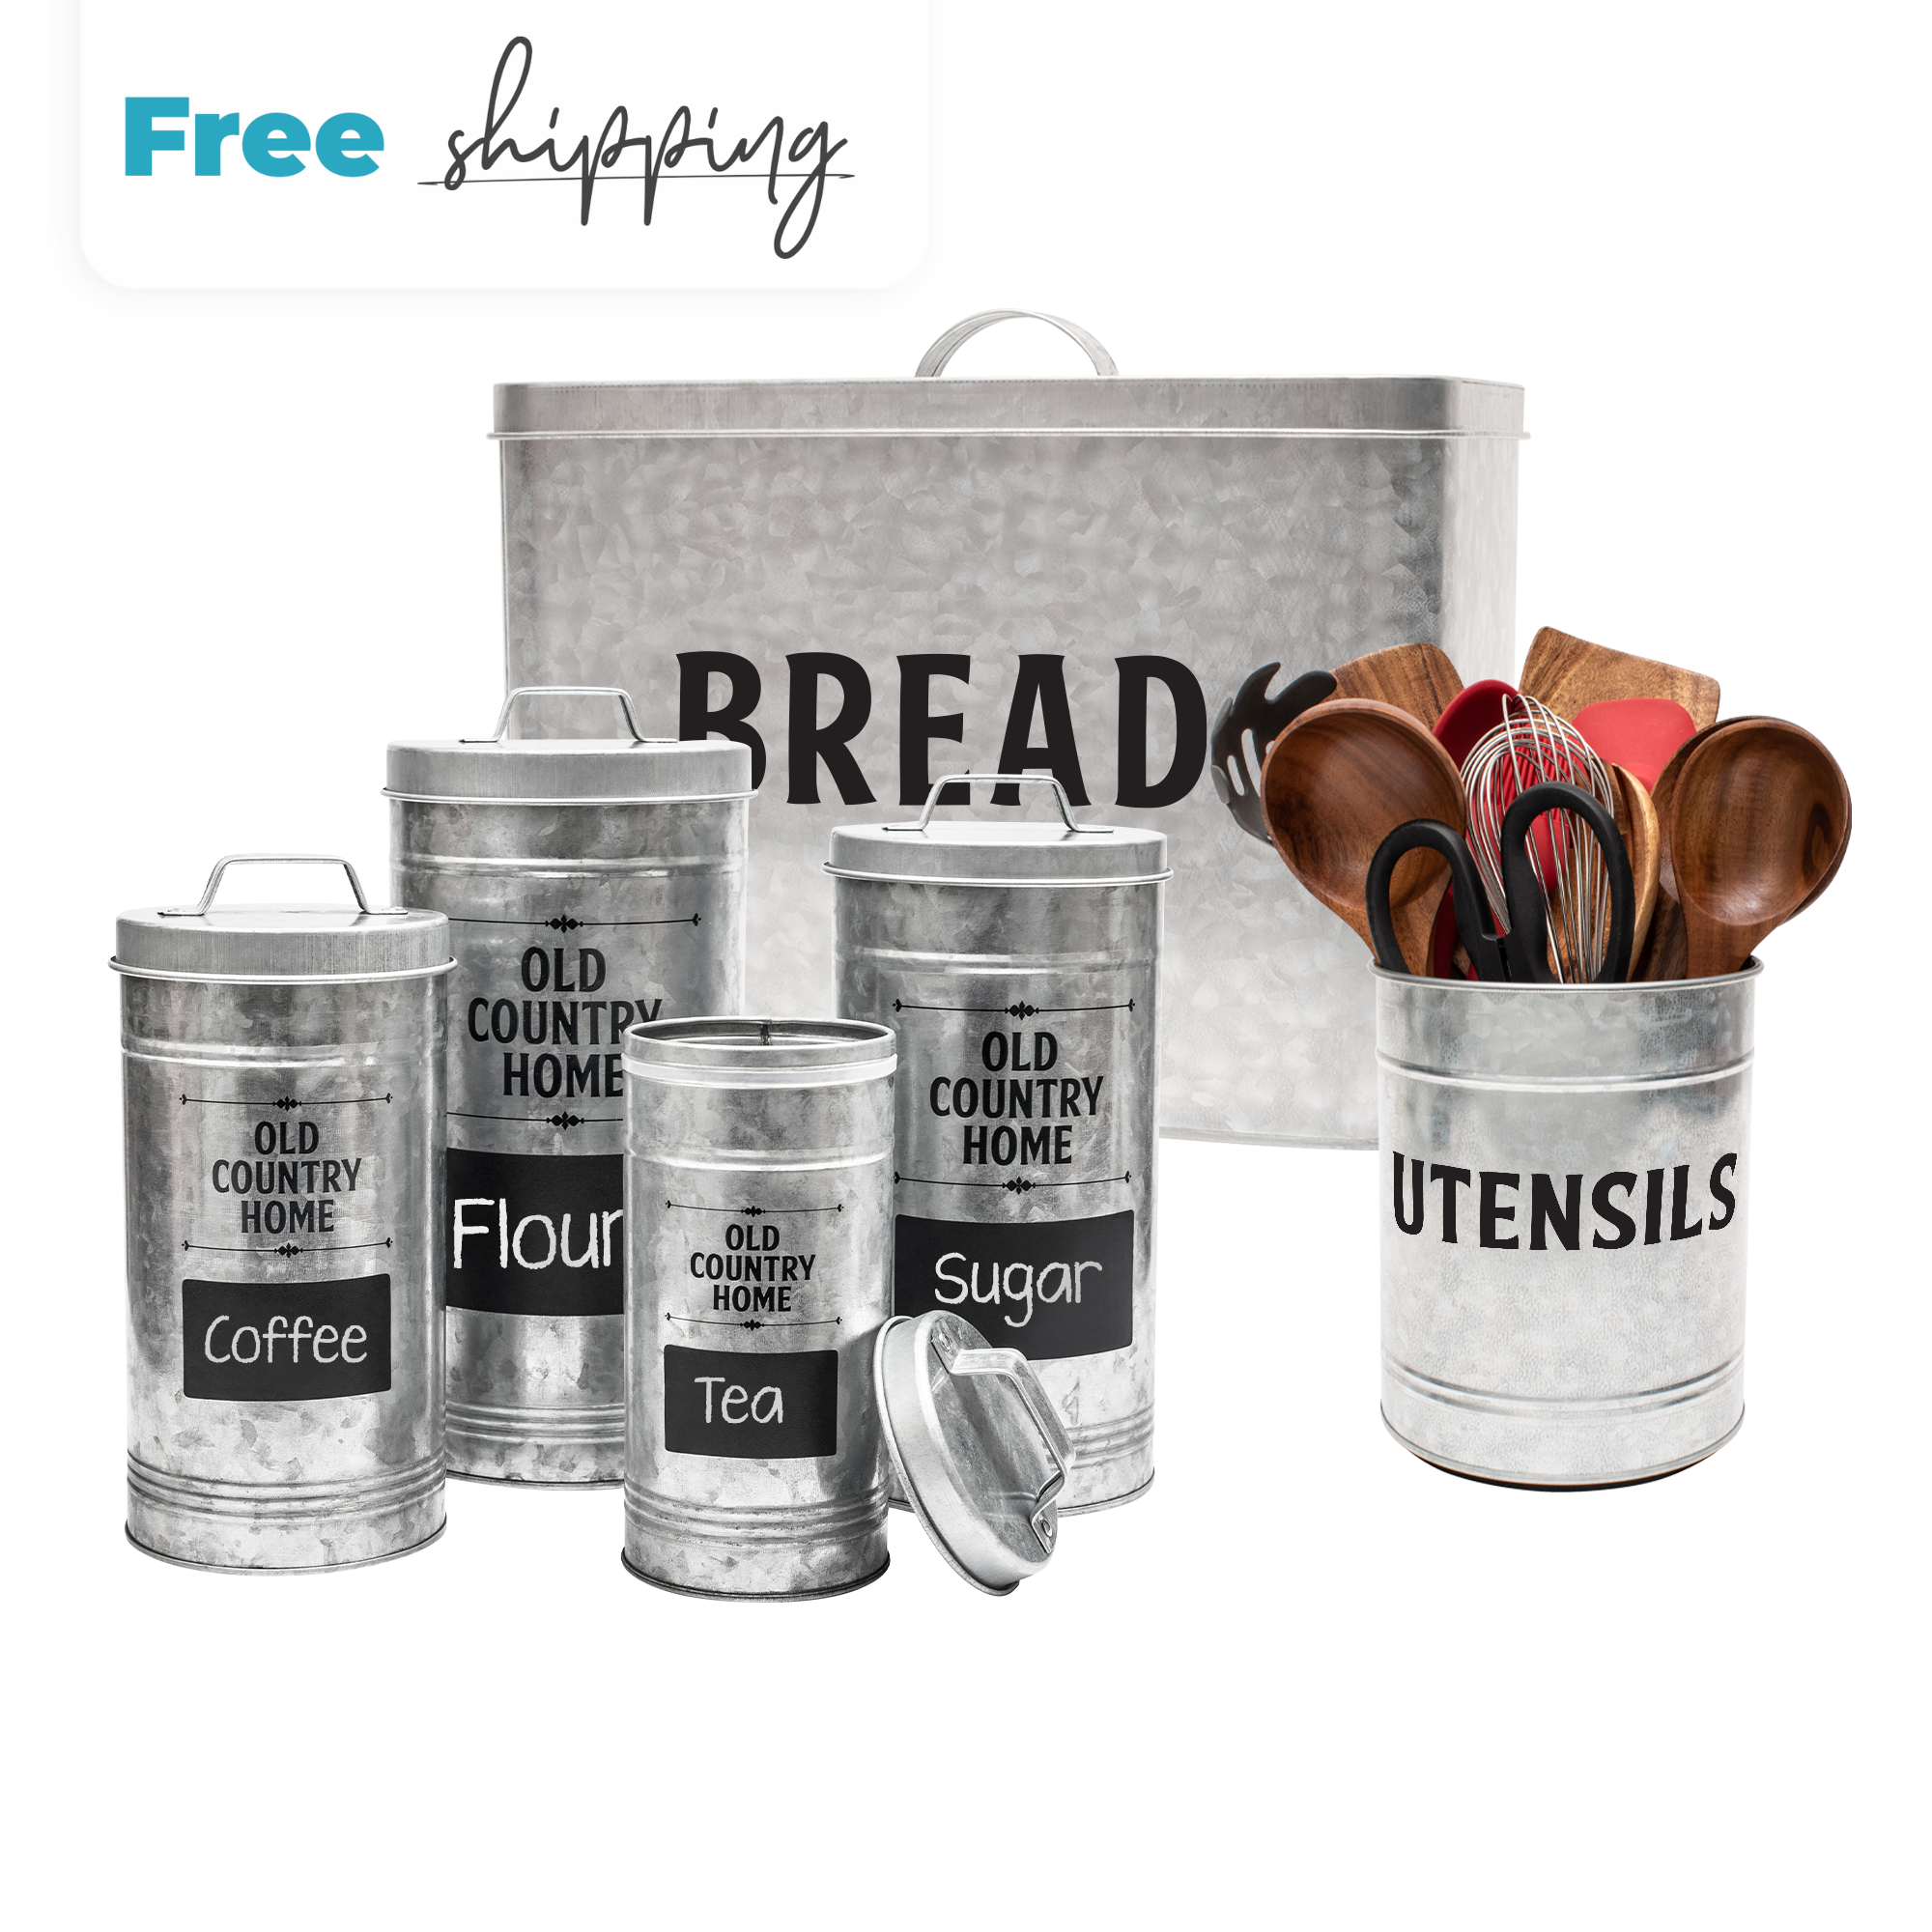 Farmhouse Storage Set by Saratoga Home - Bread Box, Set of 4 Canisters with Labels & Marker, and Galvanized Utensil Holder